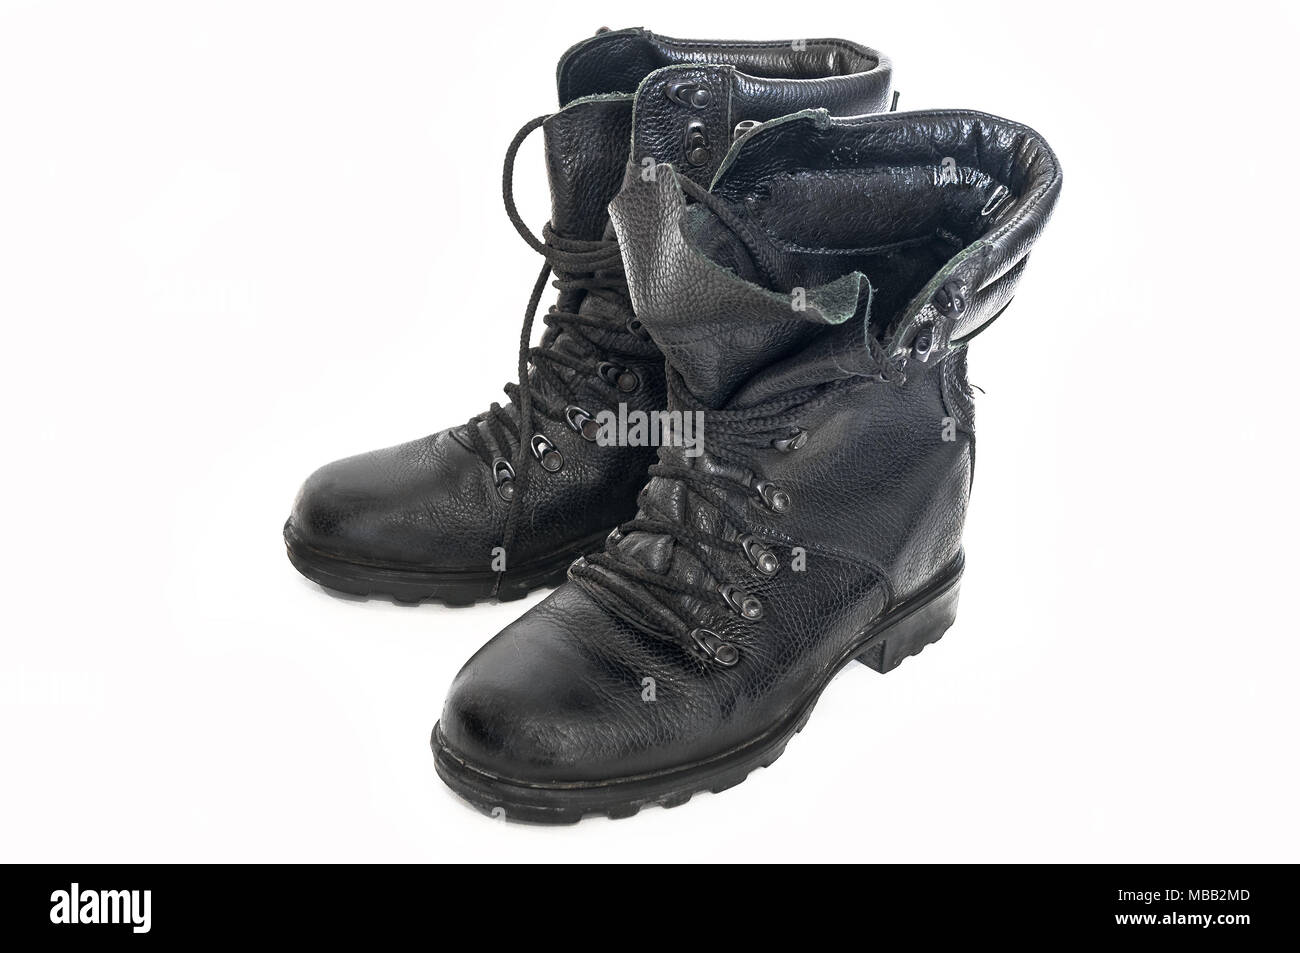 Old, worn-out boots of the Russian army of the old type, used by hunters, fishermen and tourists for outdoor activities Stock Photo